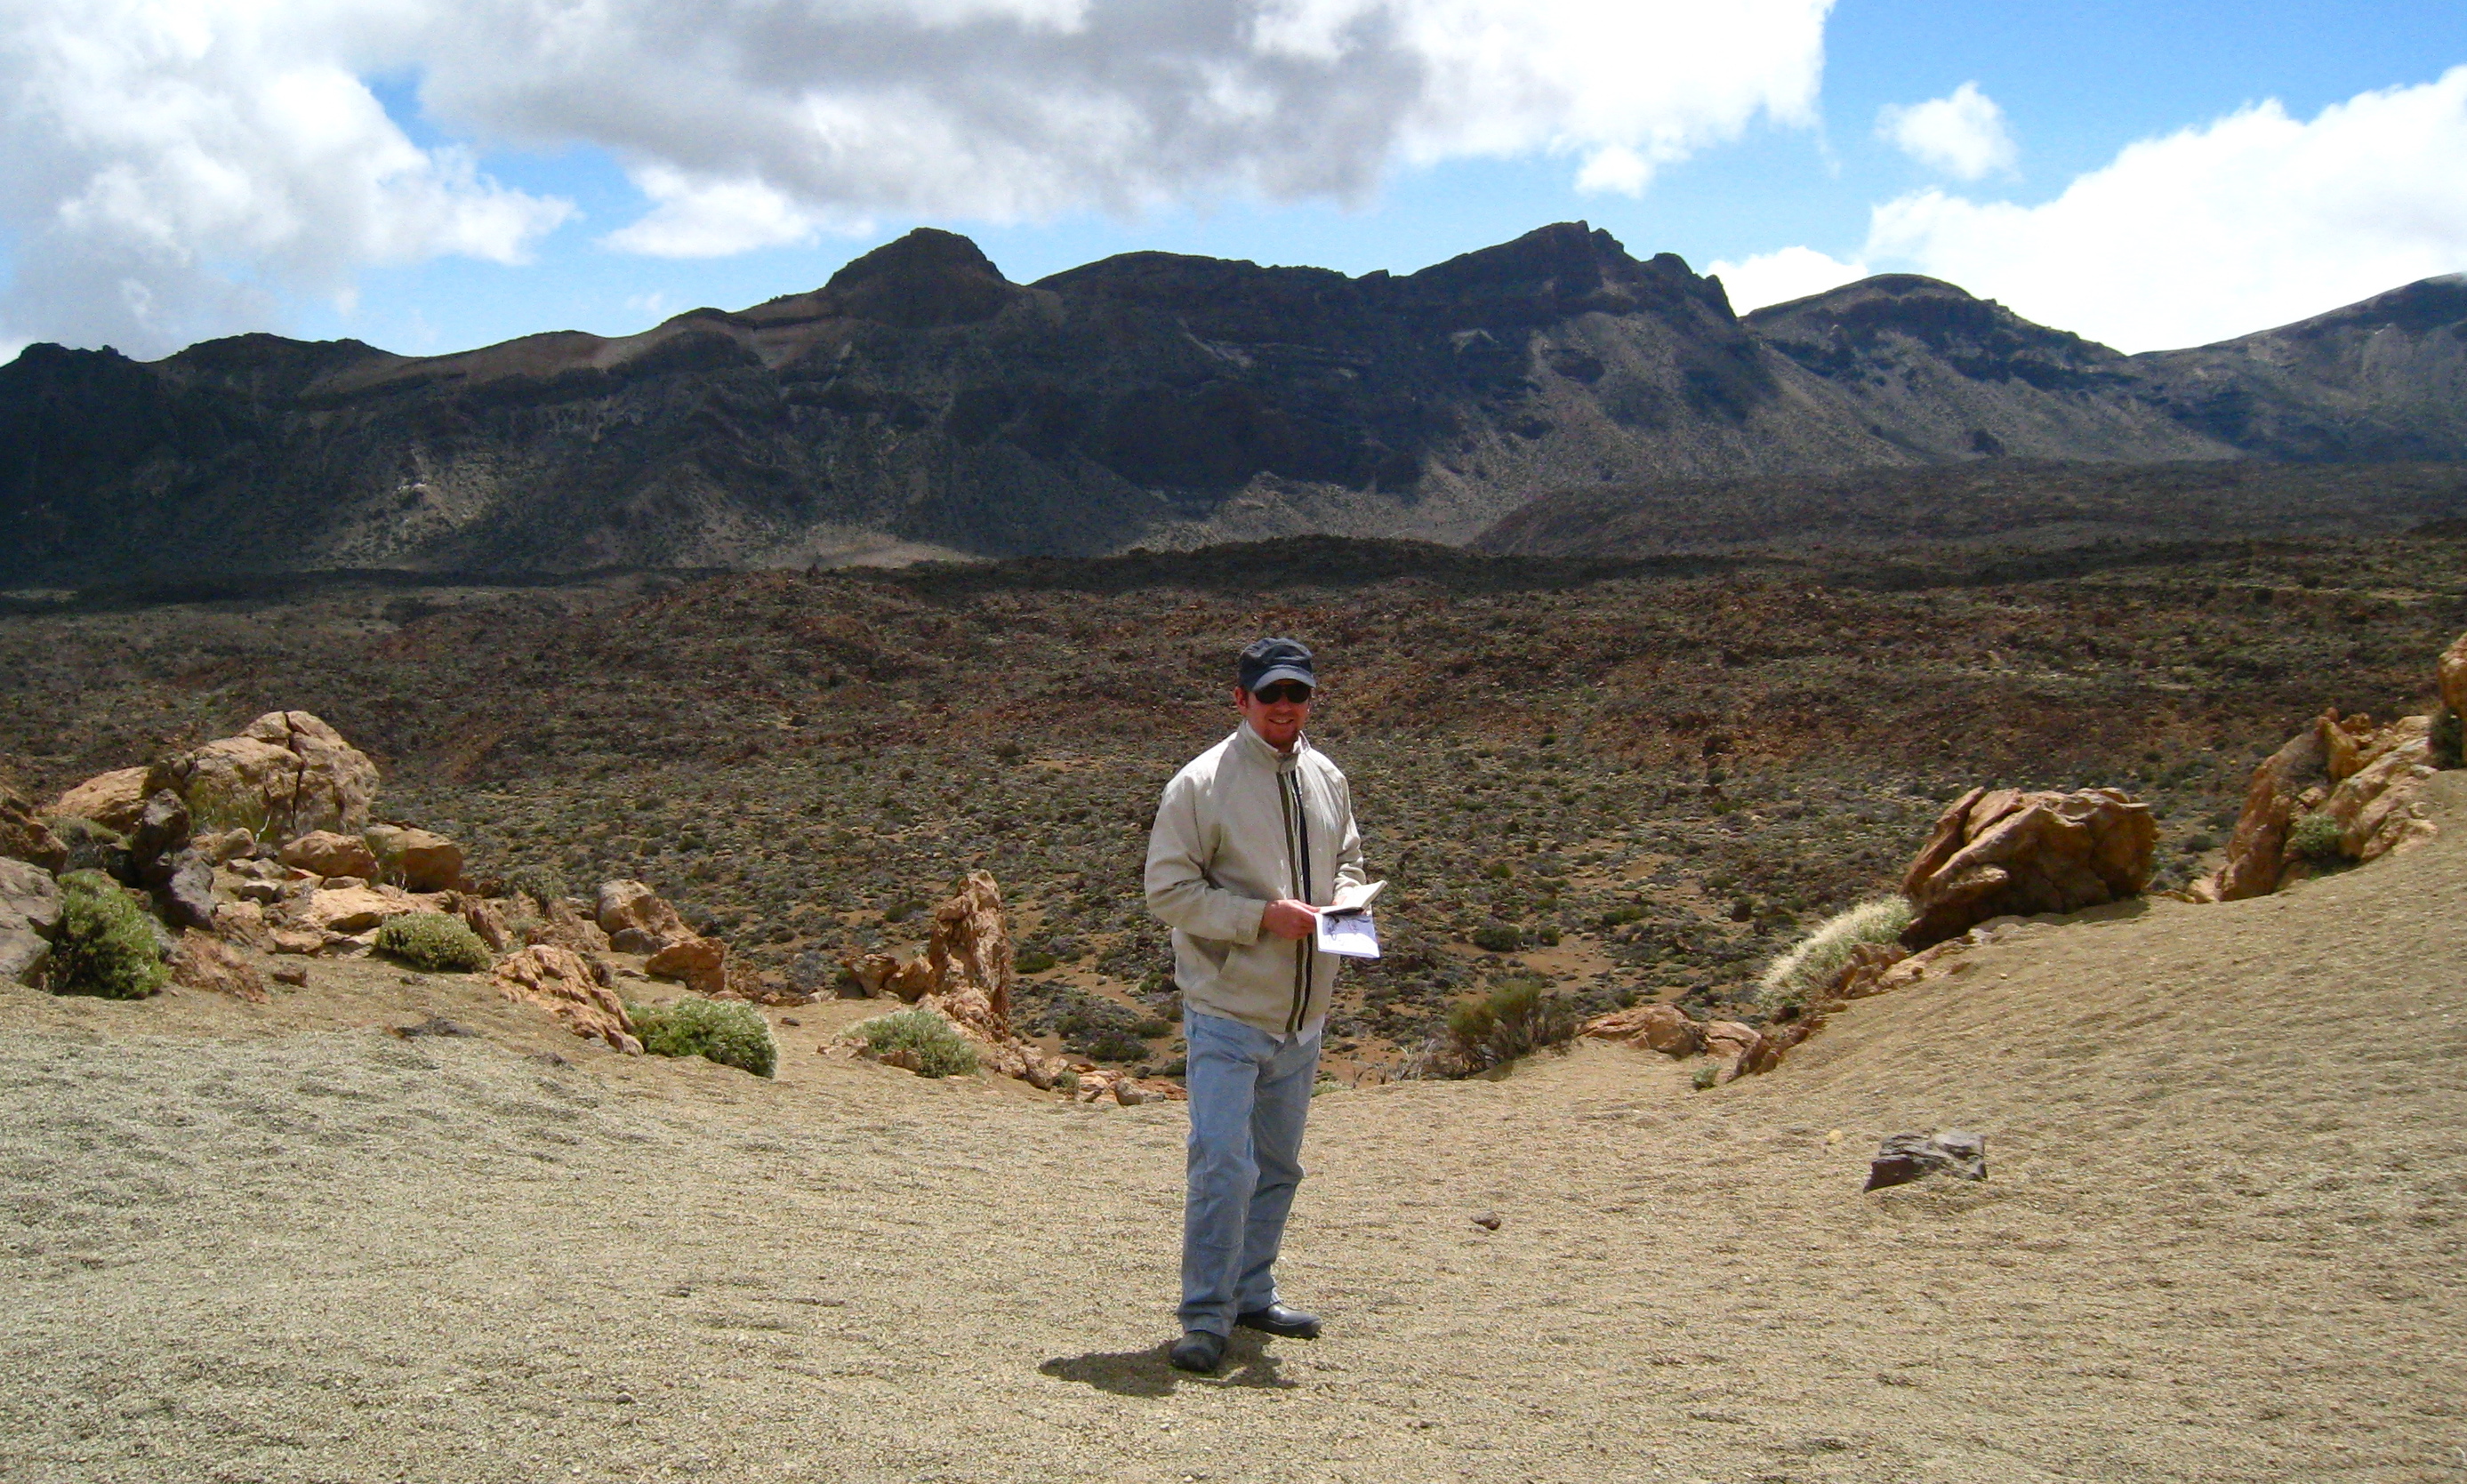 Surveying the base of Teide volcano, Canary Islands for 